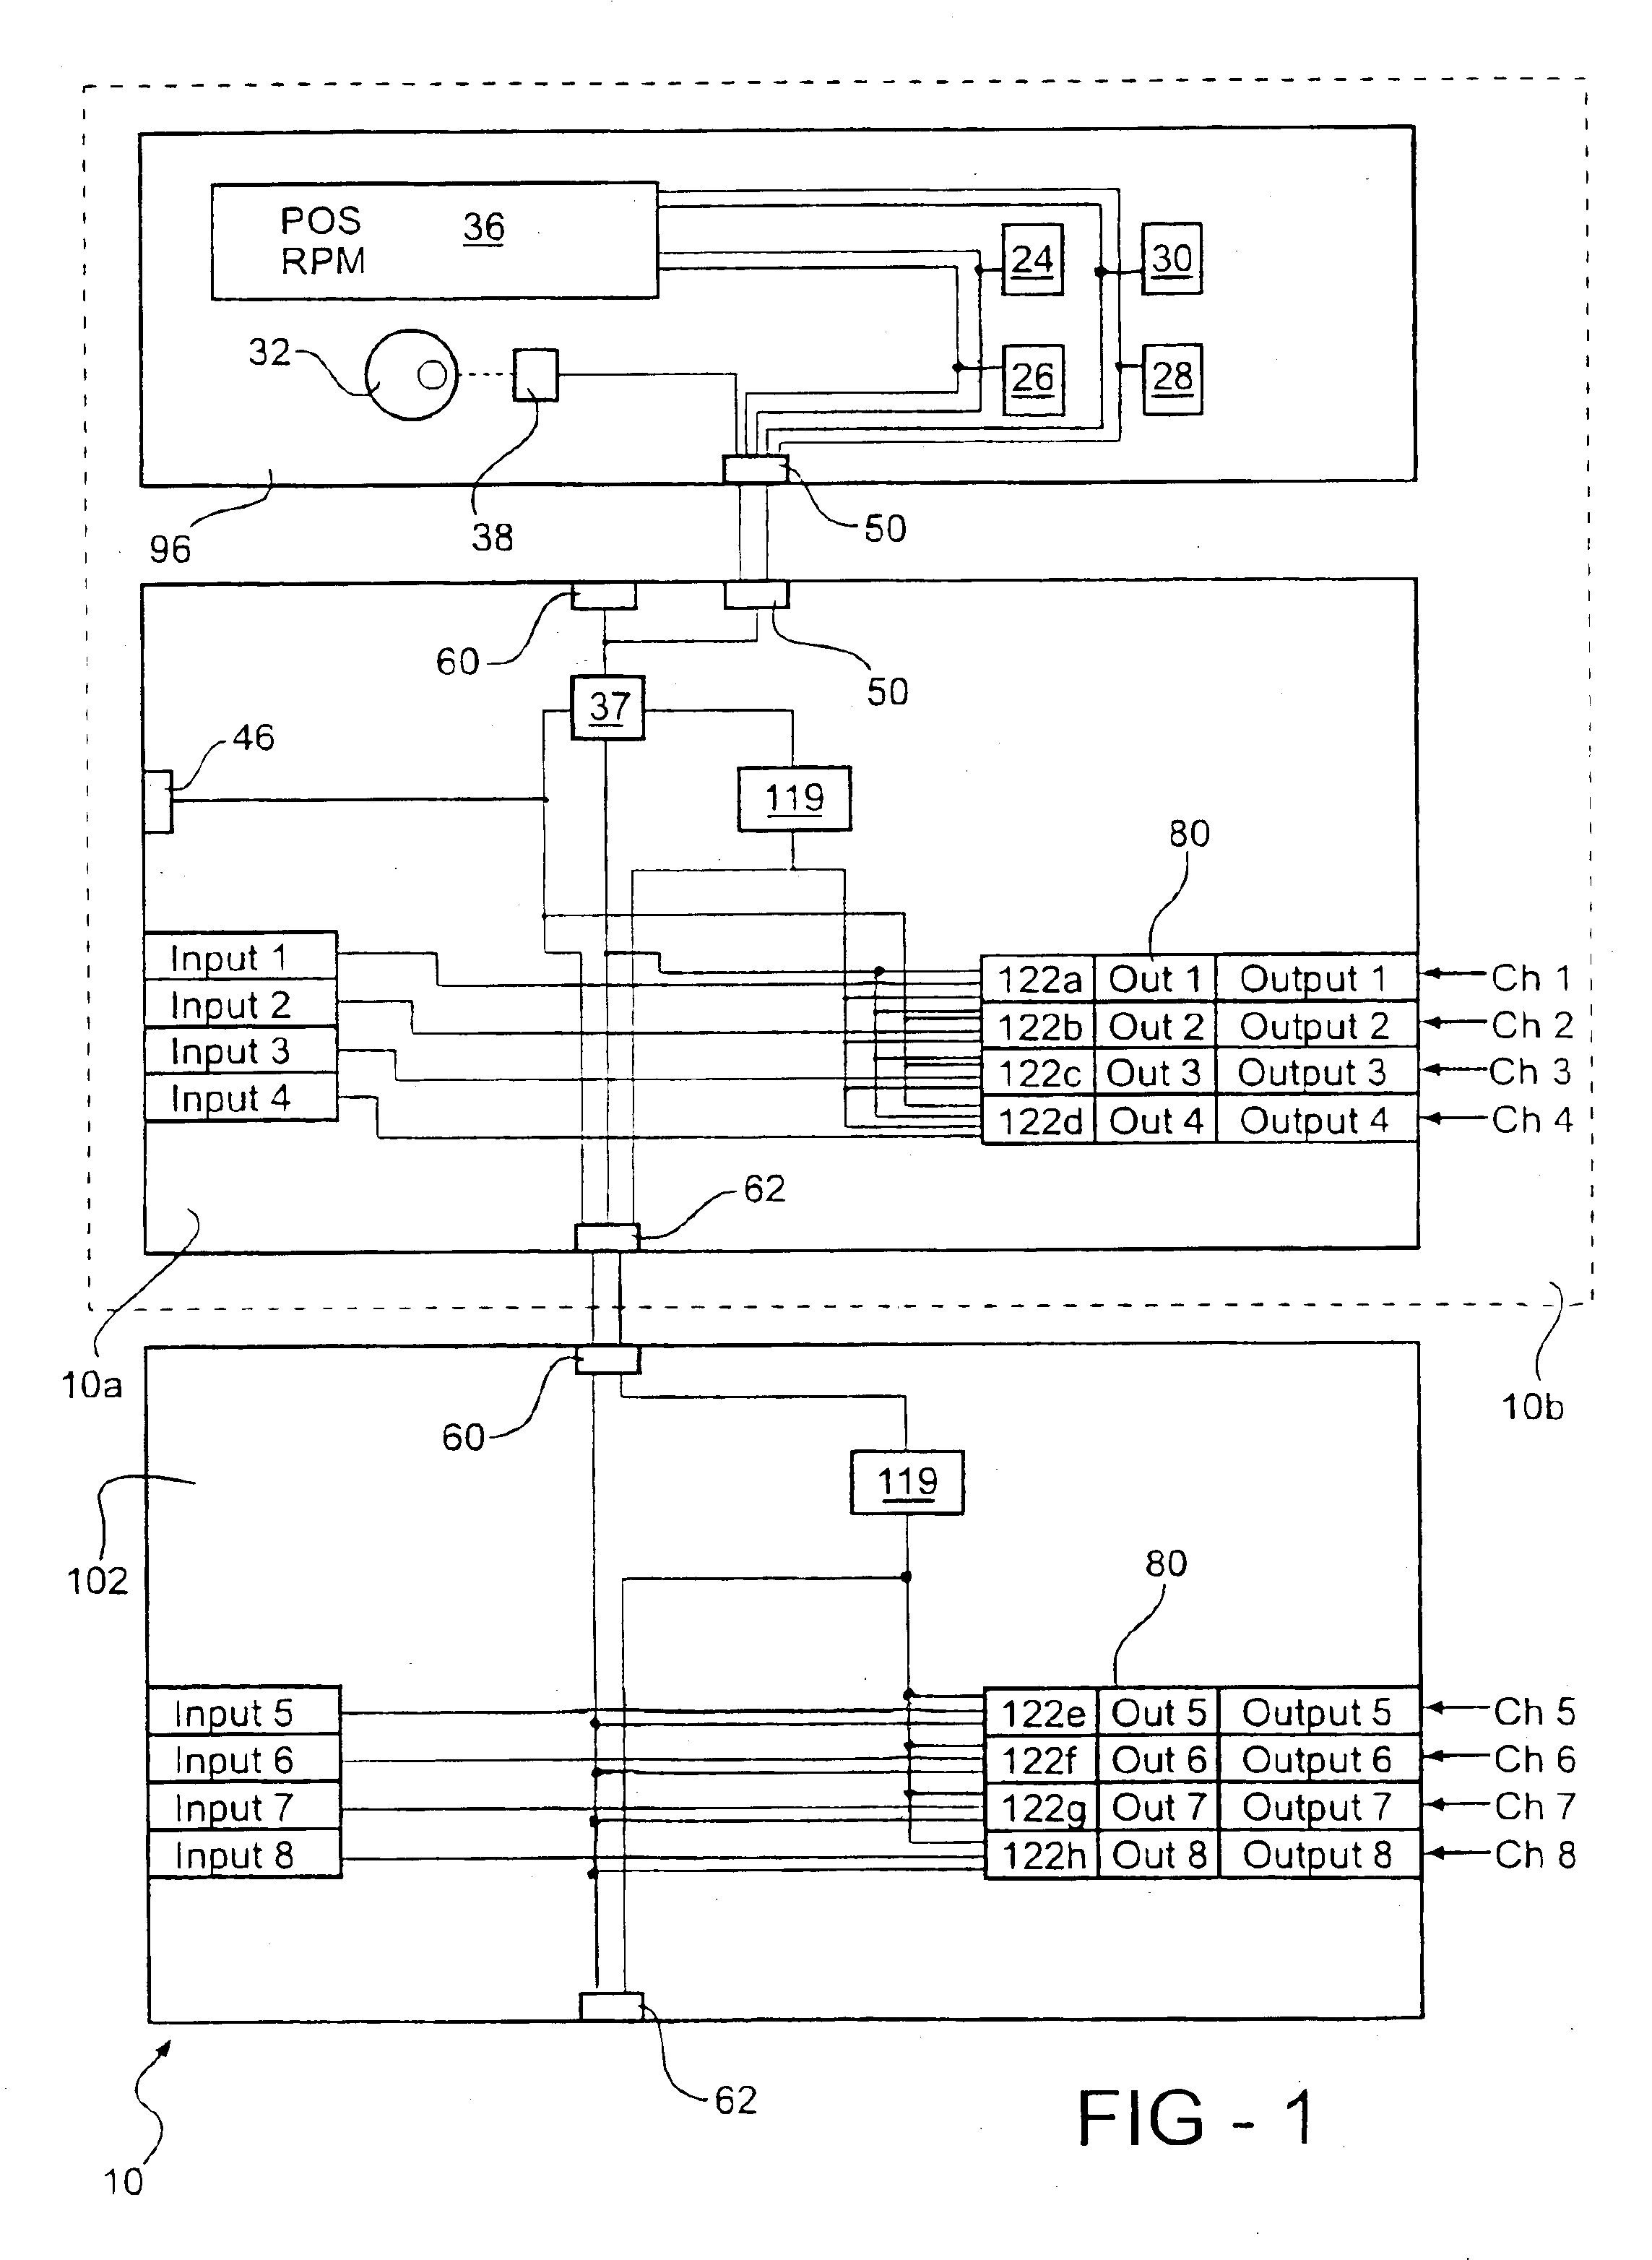 Programmable limit switch with distributed intelligence